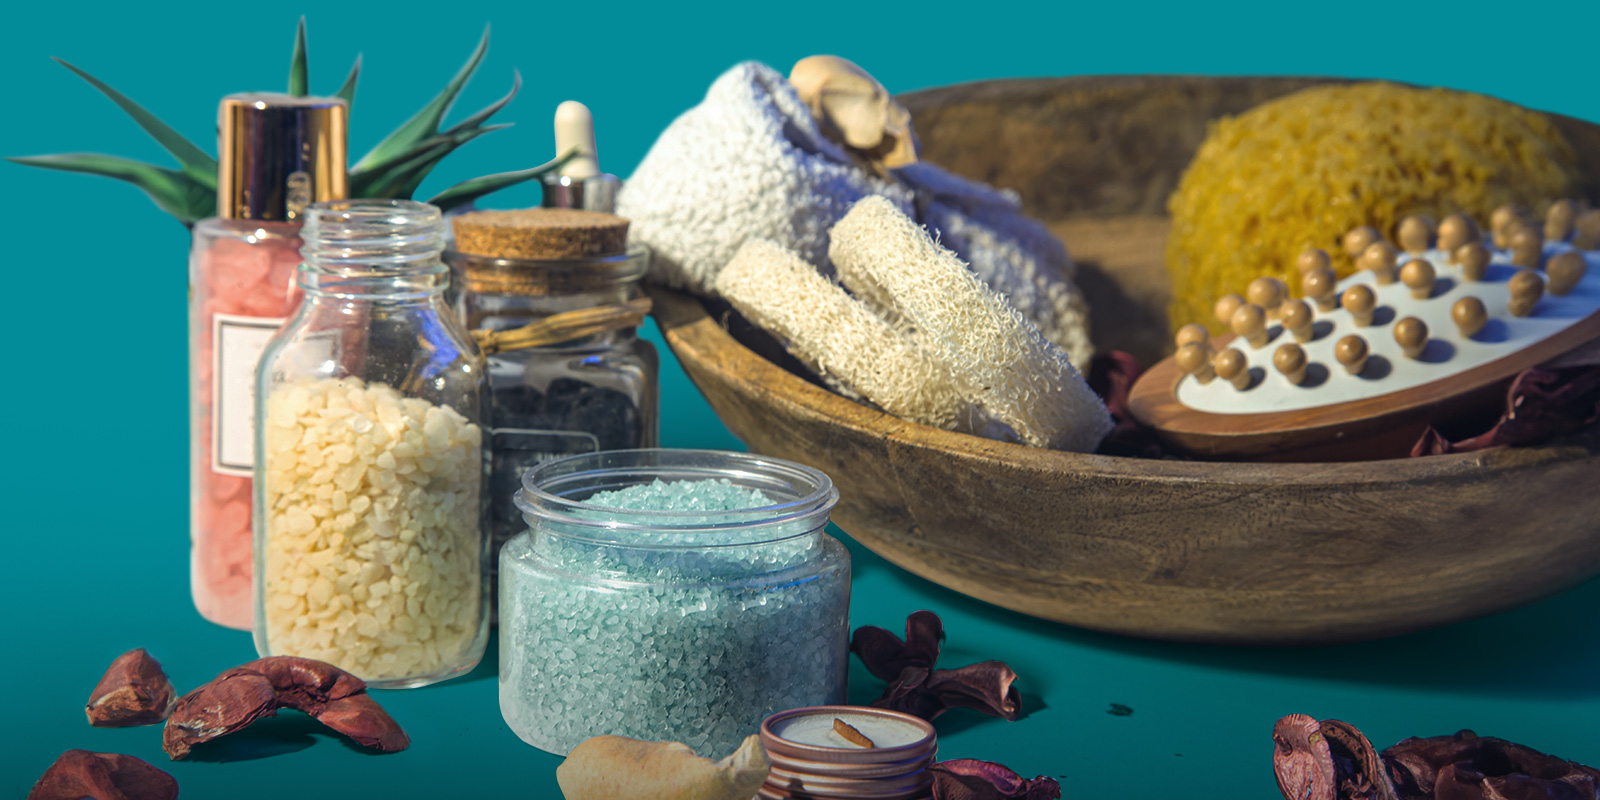 Tools Used in the Moroccan Bath and Their Benefits